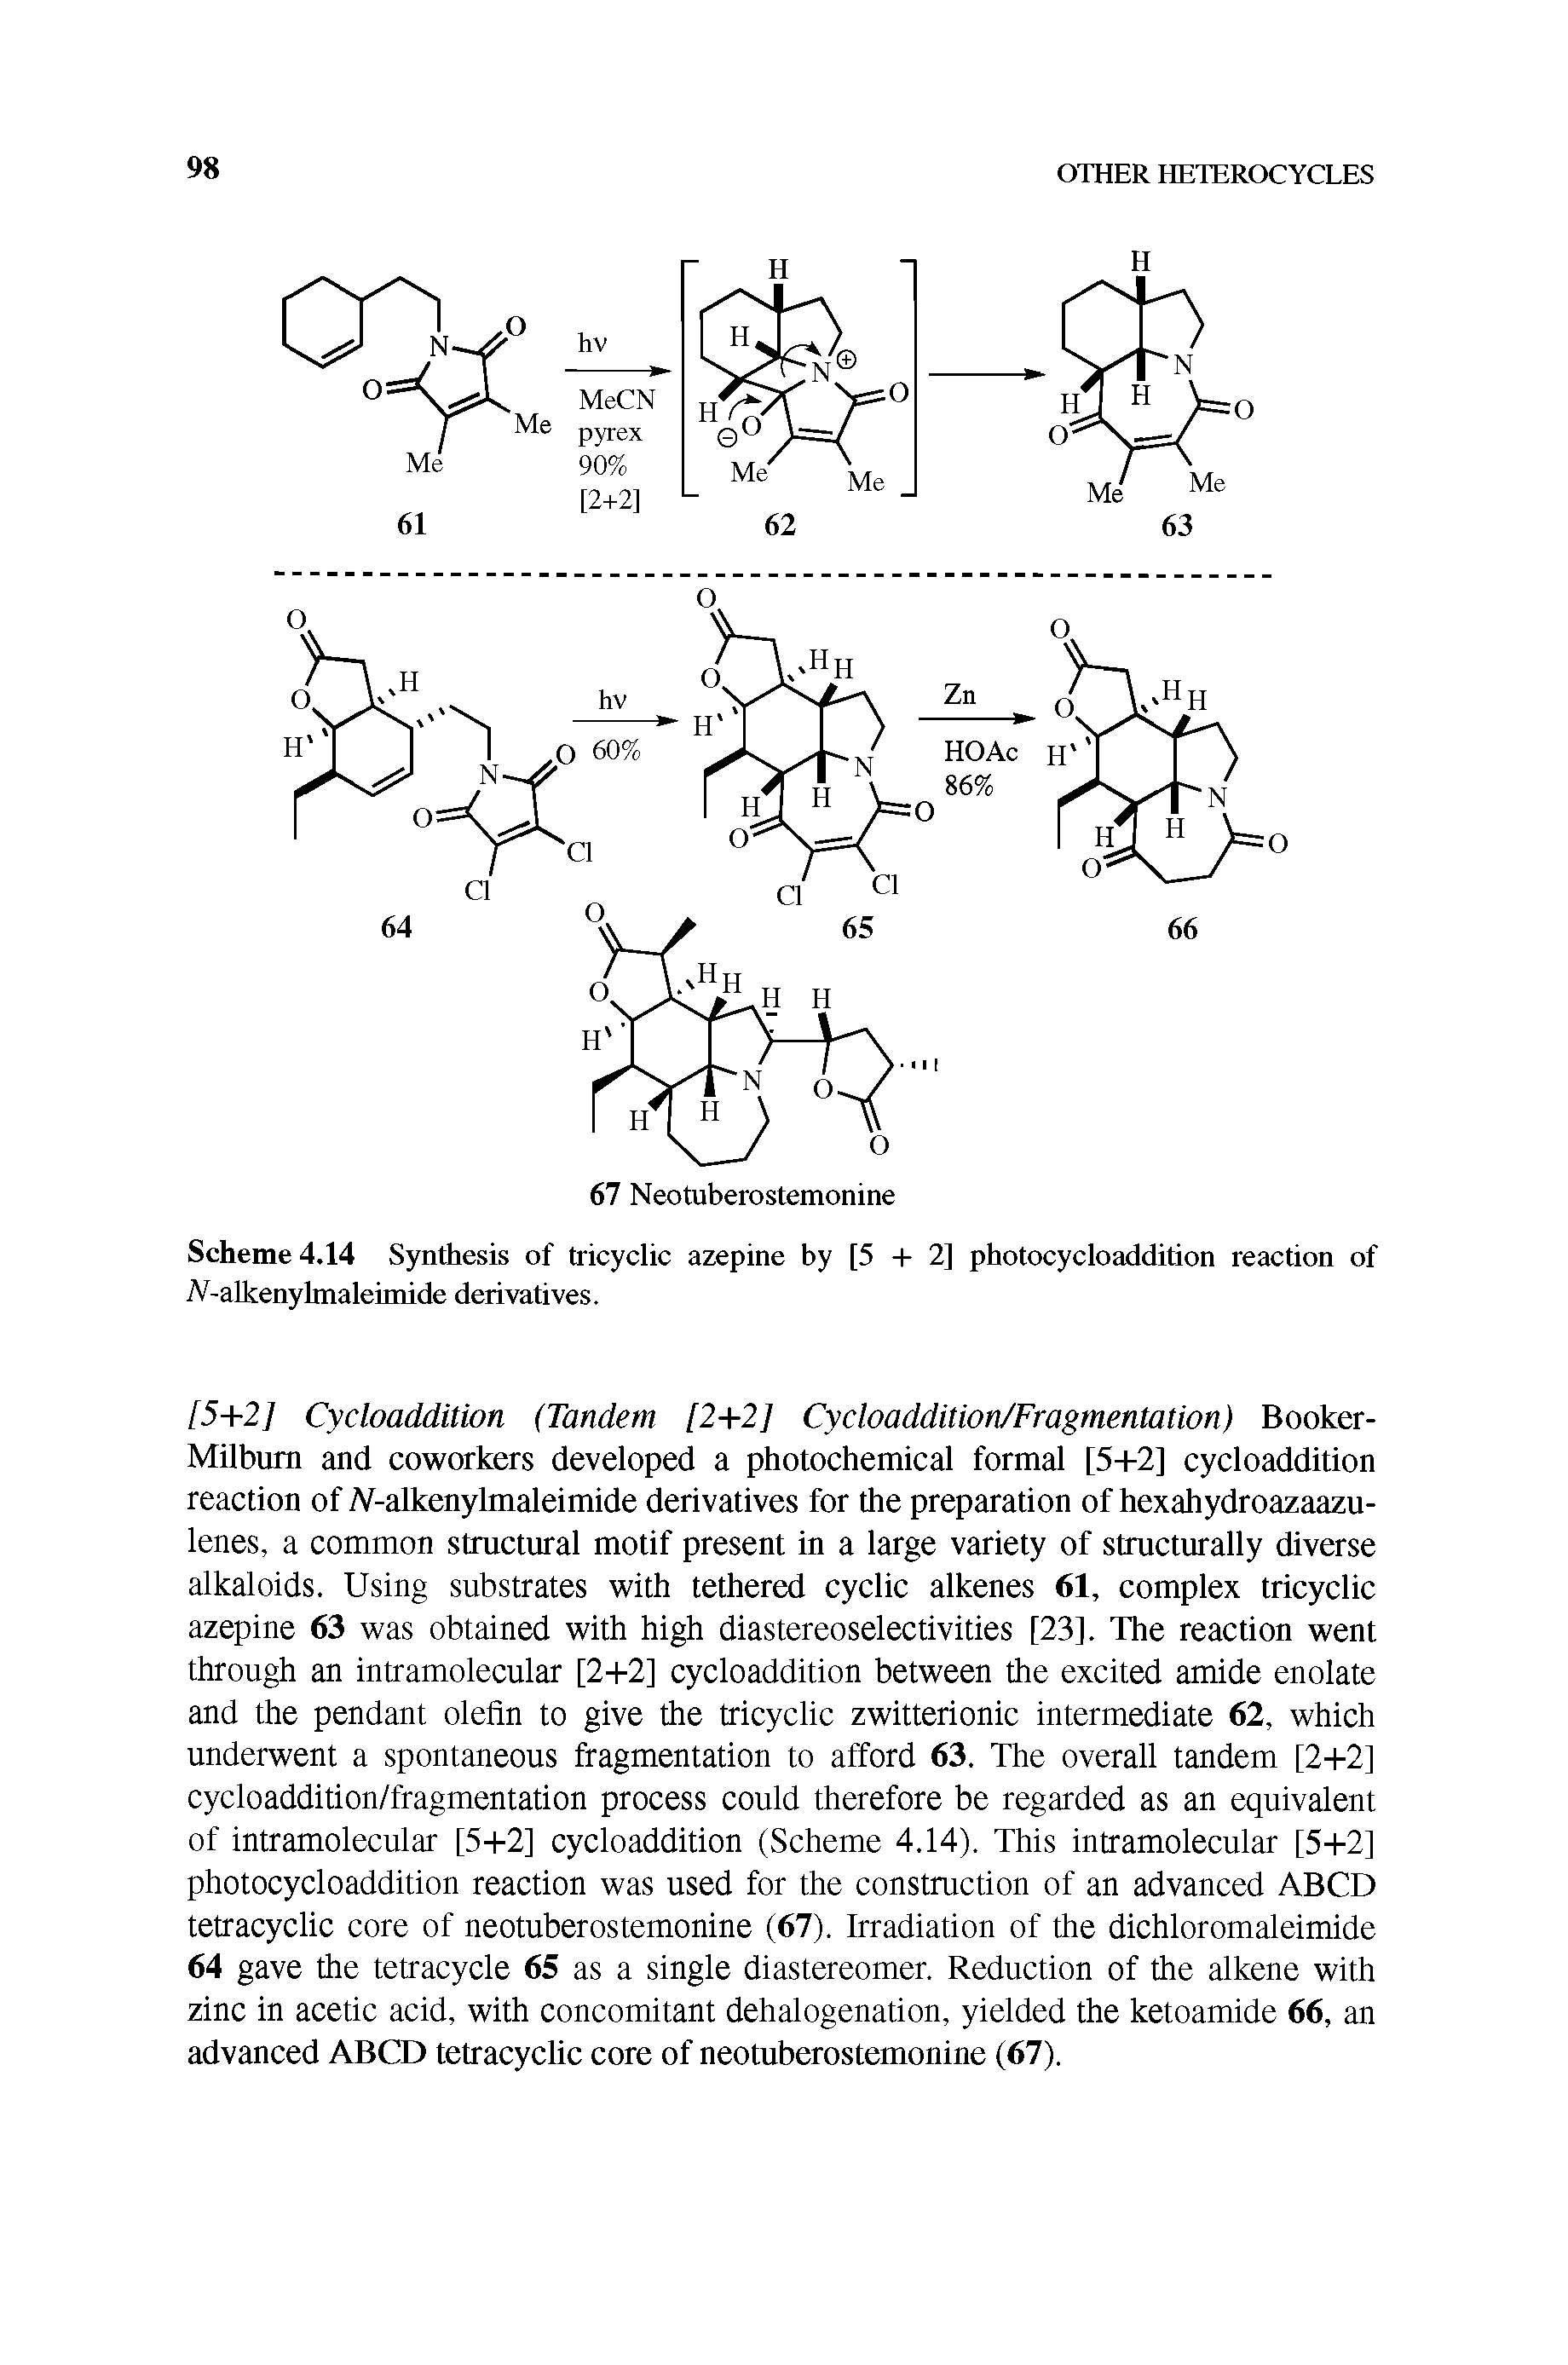 Scheme 4.14 Synthesis of tricyclic azepine by [5 + 2] photocycloaddition reaction of A -alkenyhnaleimide derivatives.